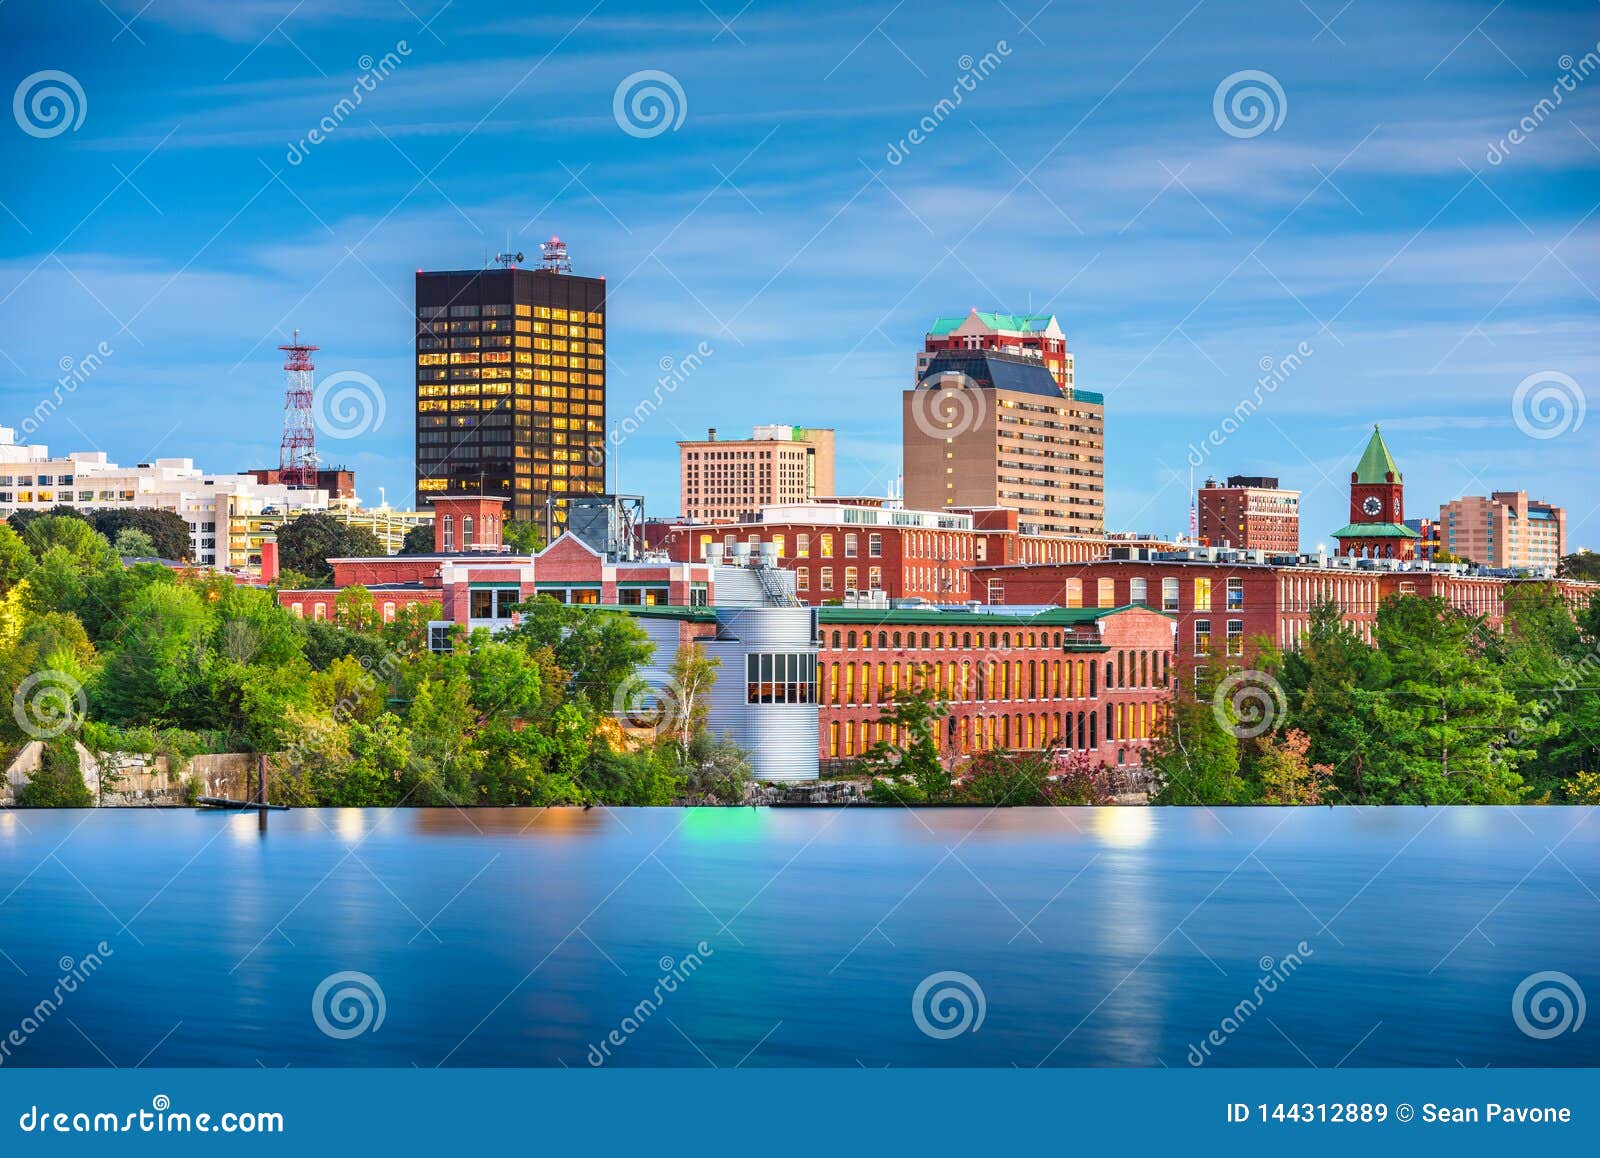 manchester, new hampshire, usa skyline on the merrimack river